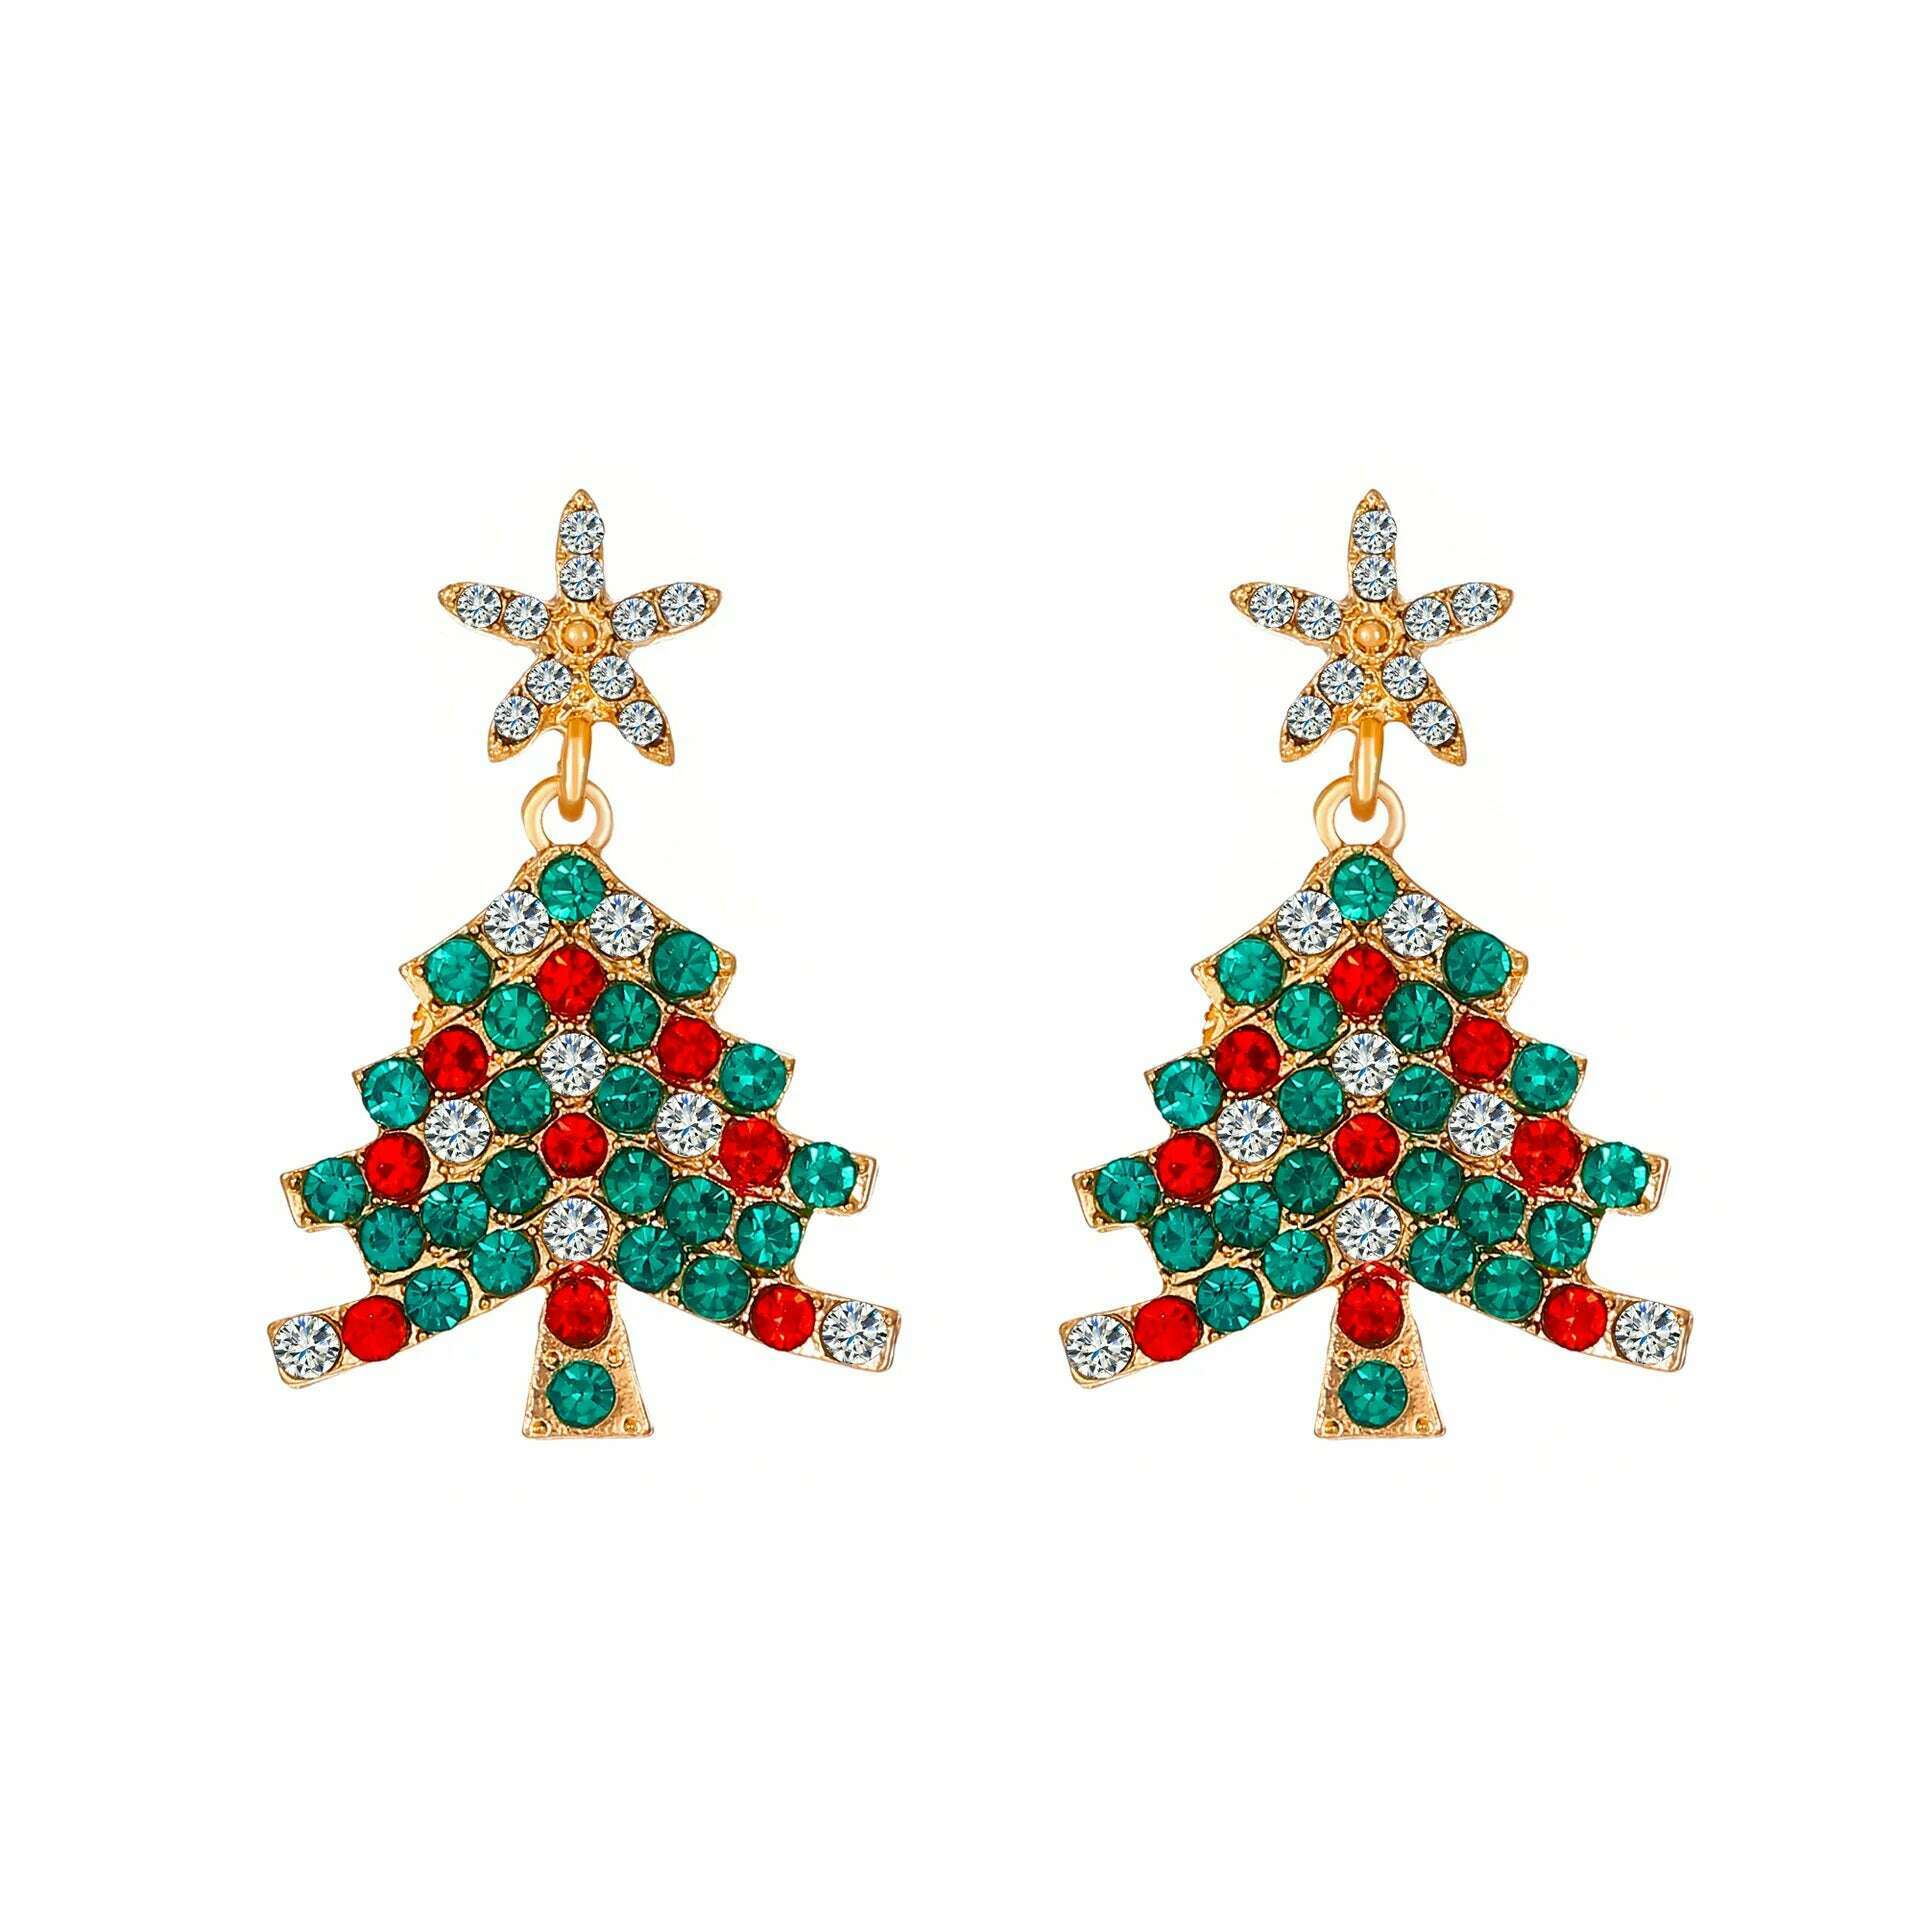 KIMLUD, New Full Inlaid Colorful Zircon Christmas Tree Tassel Earrings Women's Fashion Personality Earrings Party Jewelry Christmas Gift, B, KIMLUD Womens Clothes